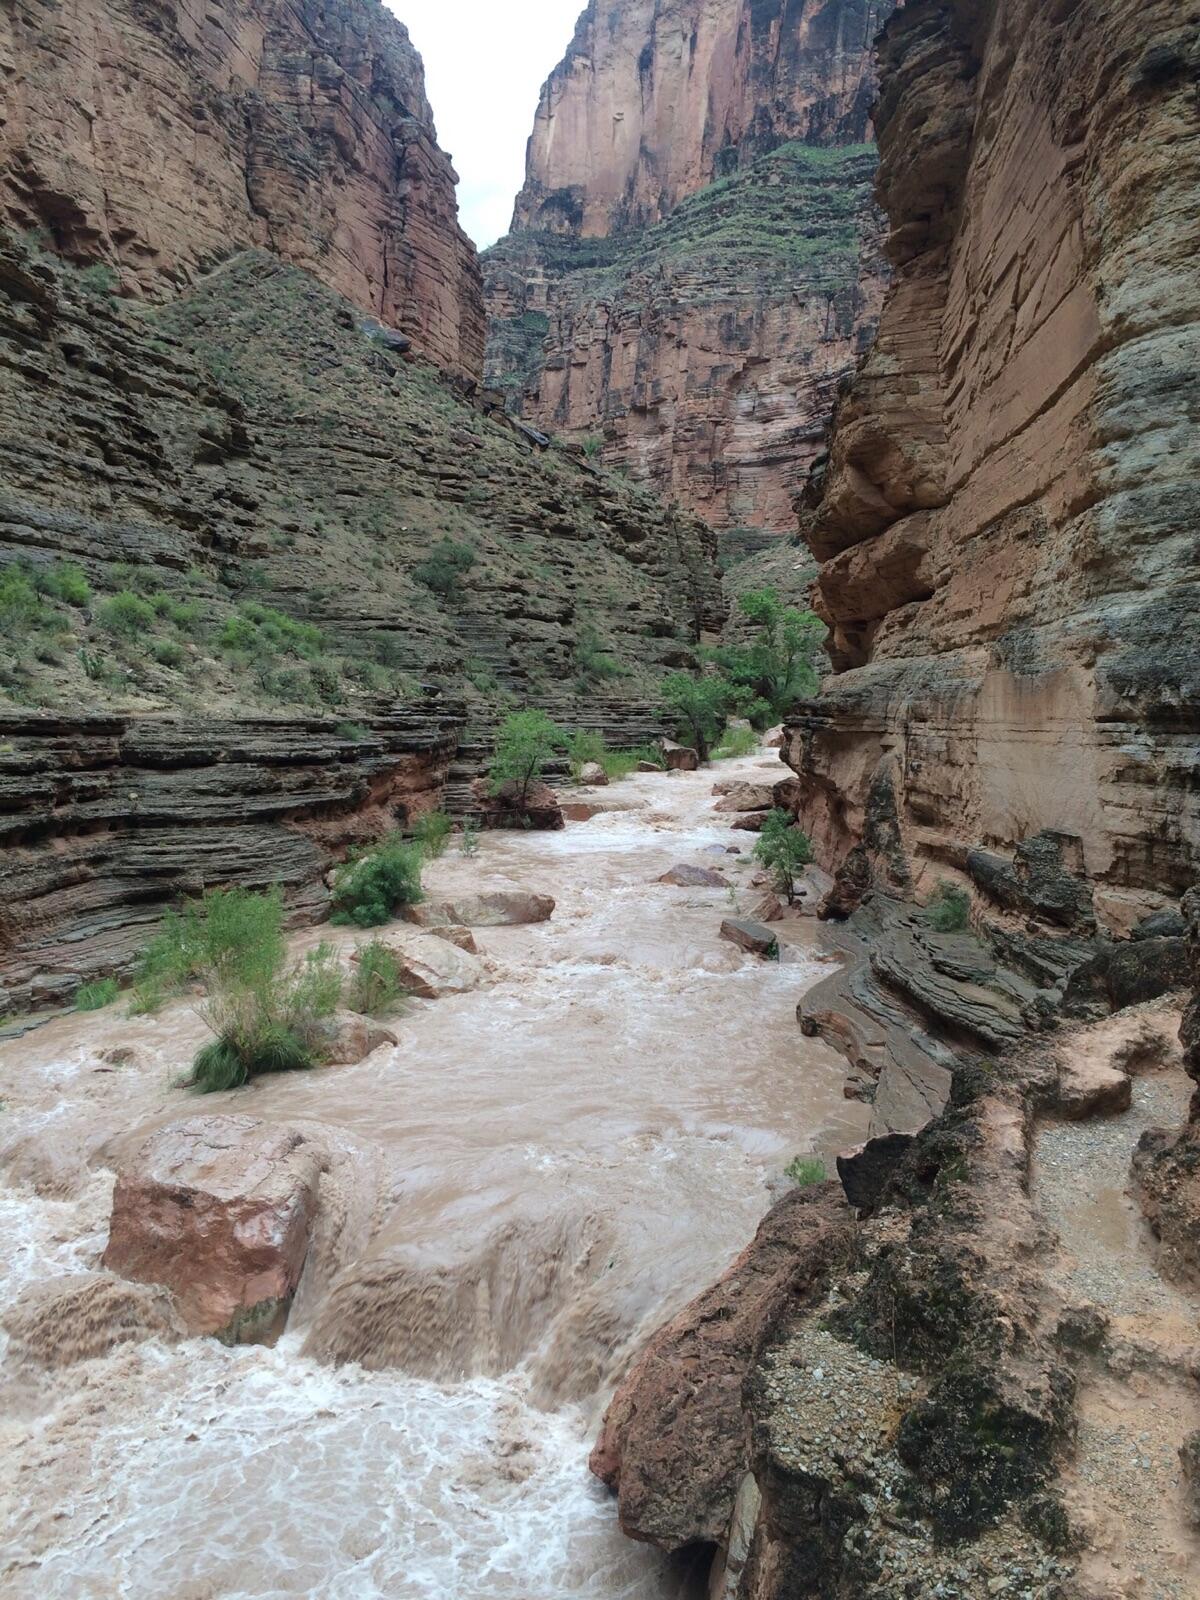 A flash flood in Havasu Creek, a tributary of the Colorado River in 2016